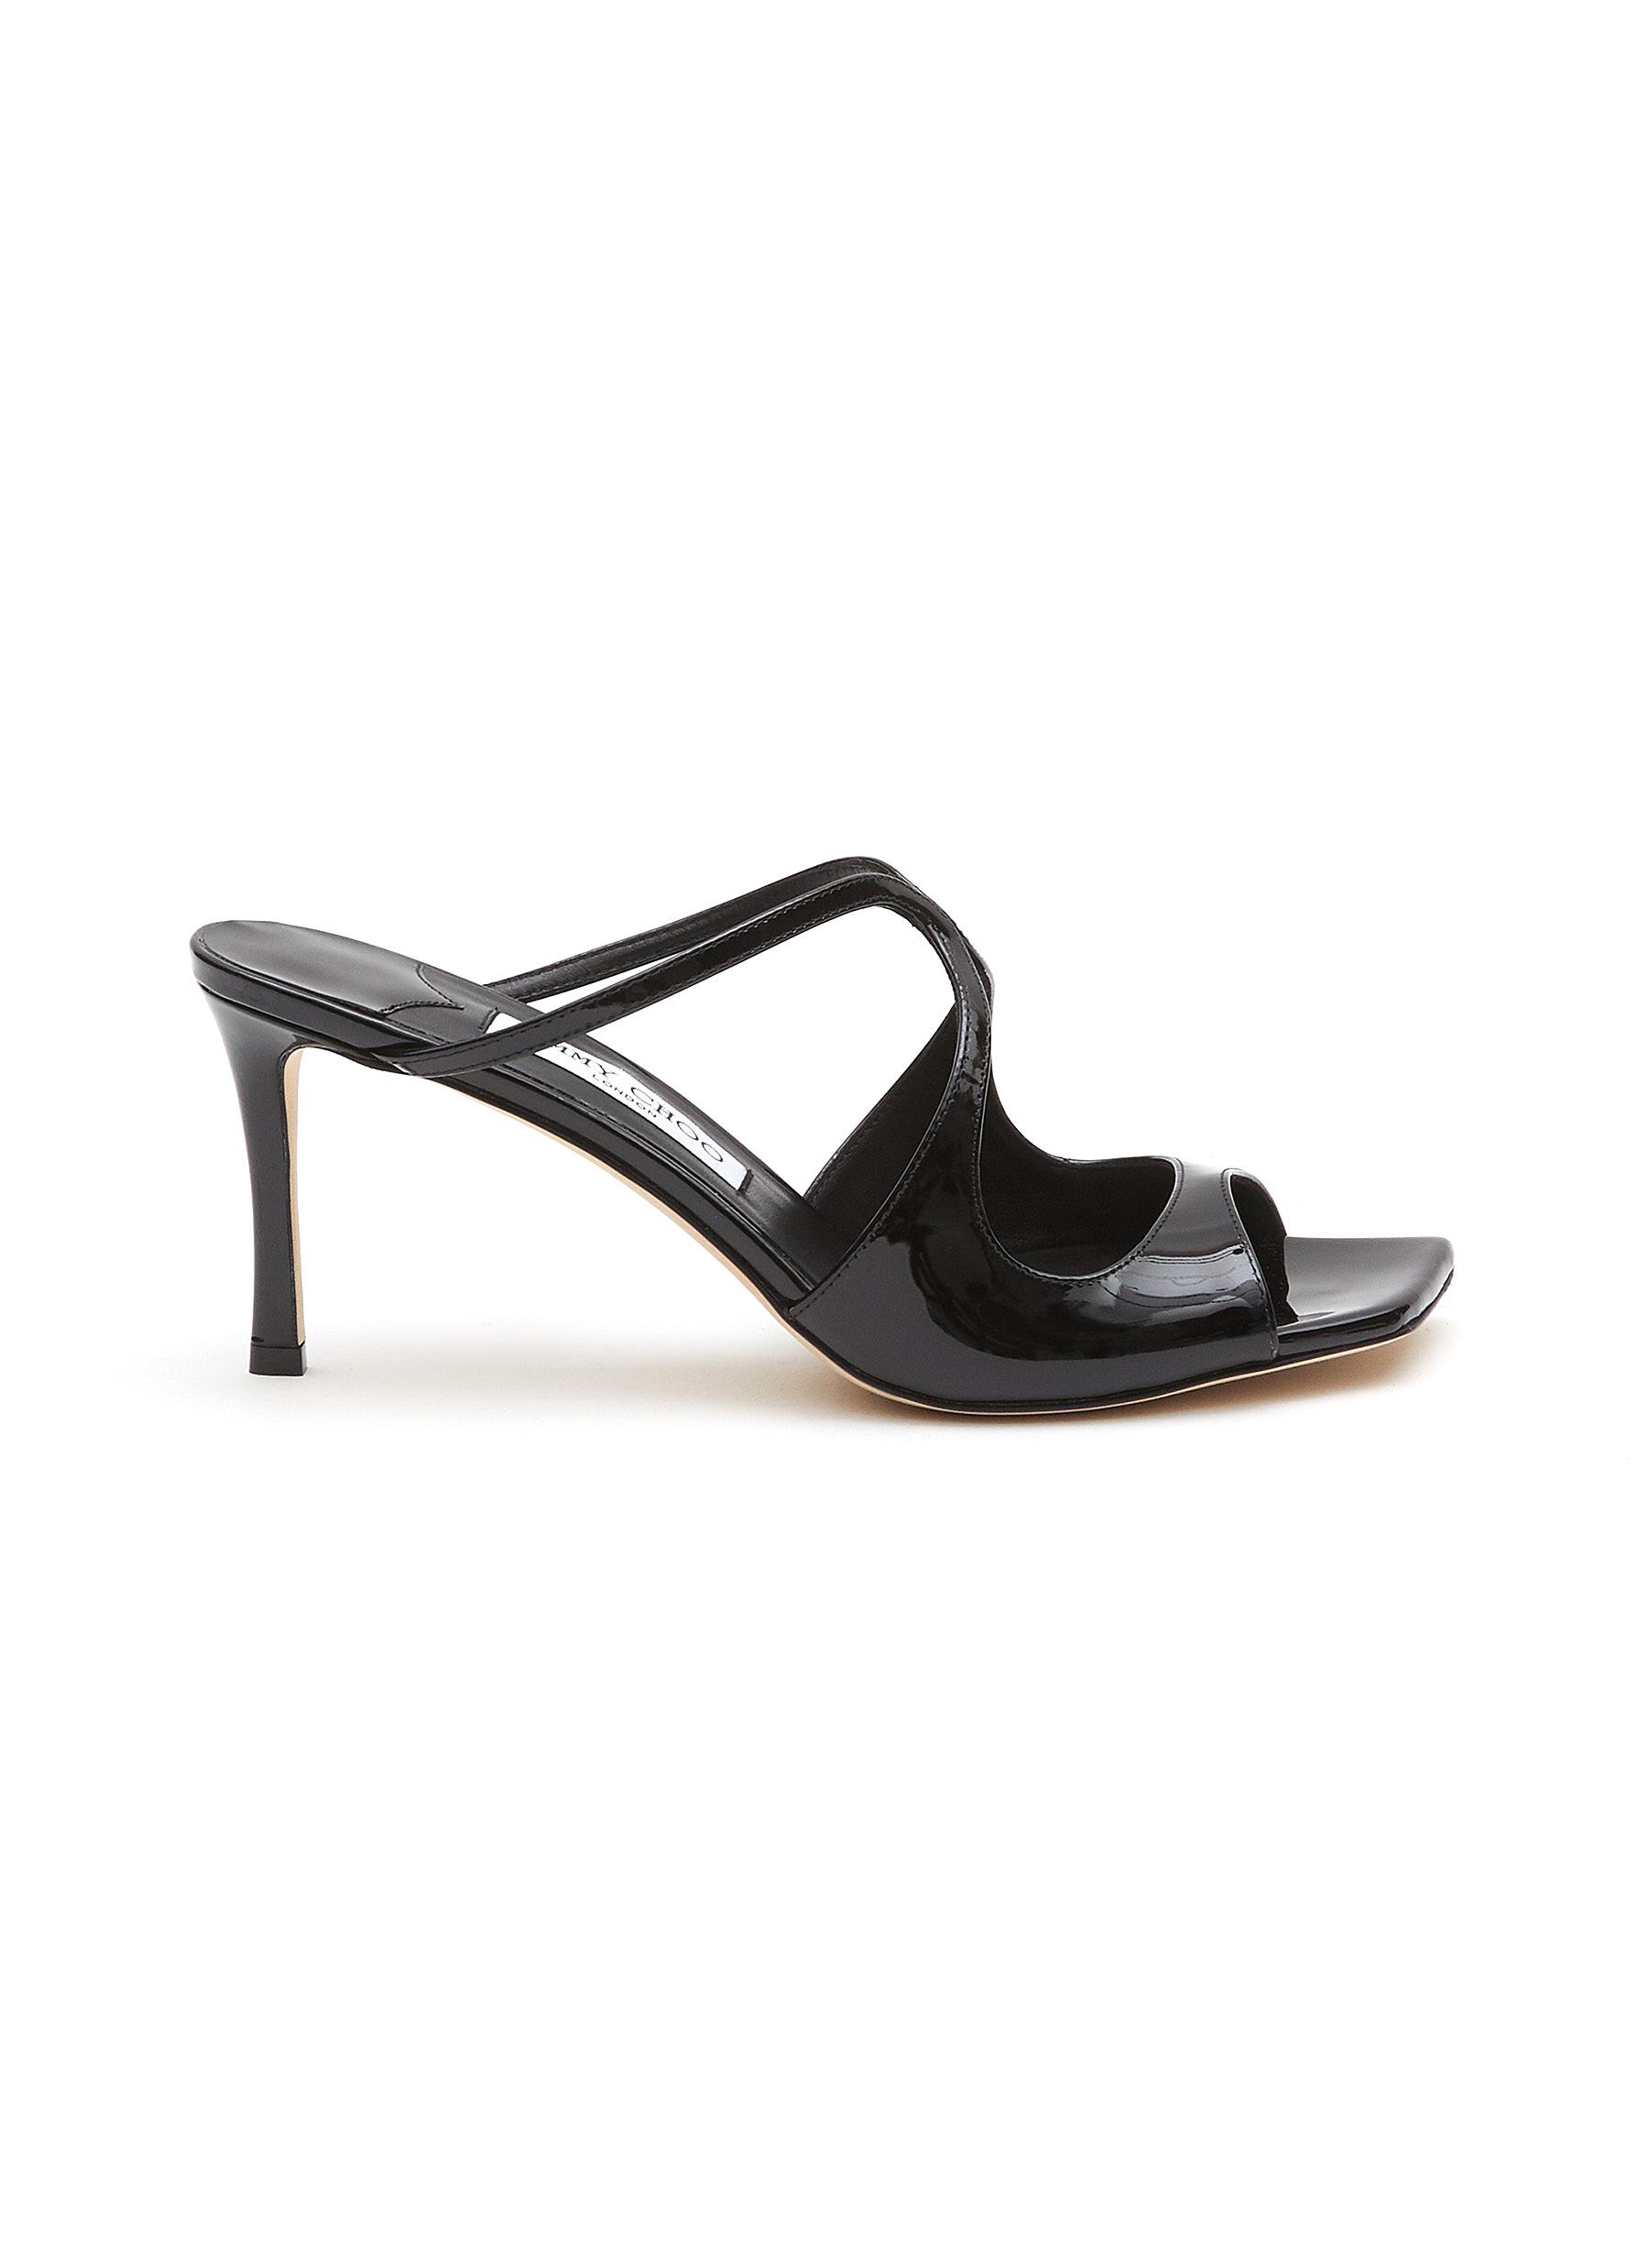 JIMMY CHOO 'ANISE' 75 PATENT LEATHER SANDALS